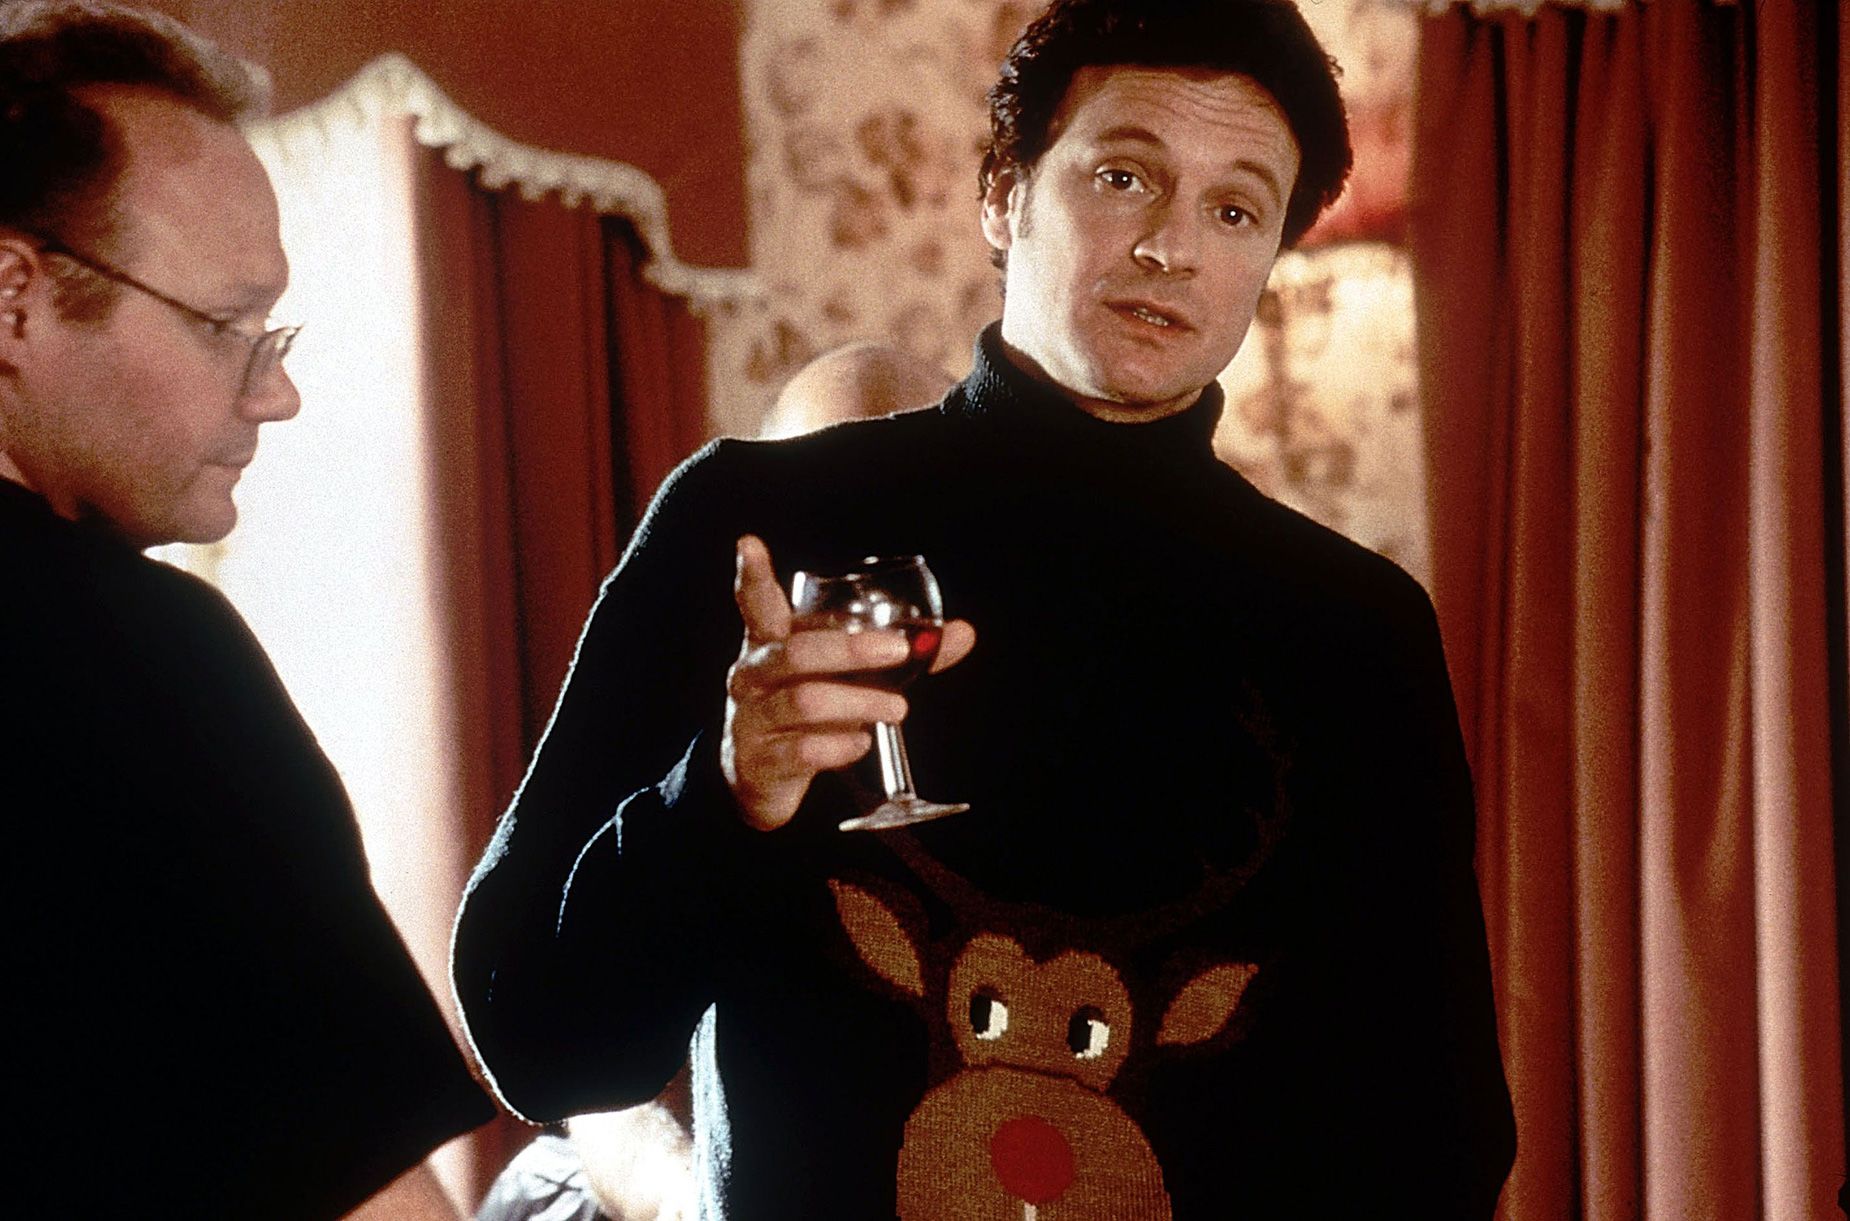 Colin Firth sports a fine example of the ugly Christmas sweater in 2001 hit movie "Bridget Jones's Diary."